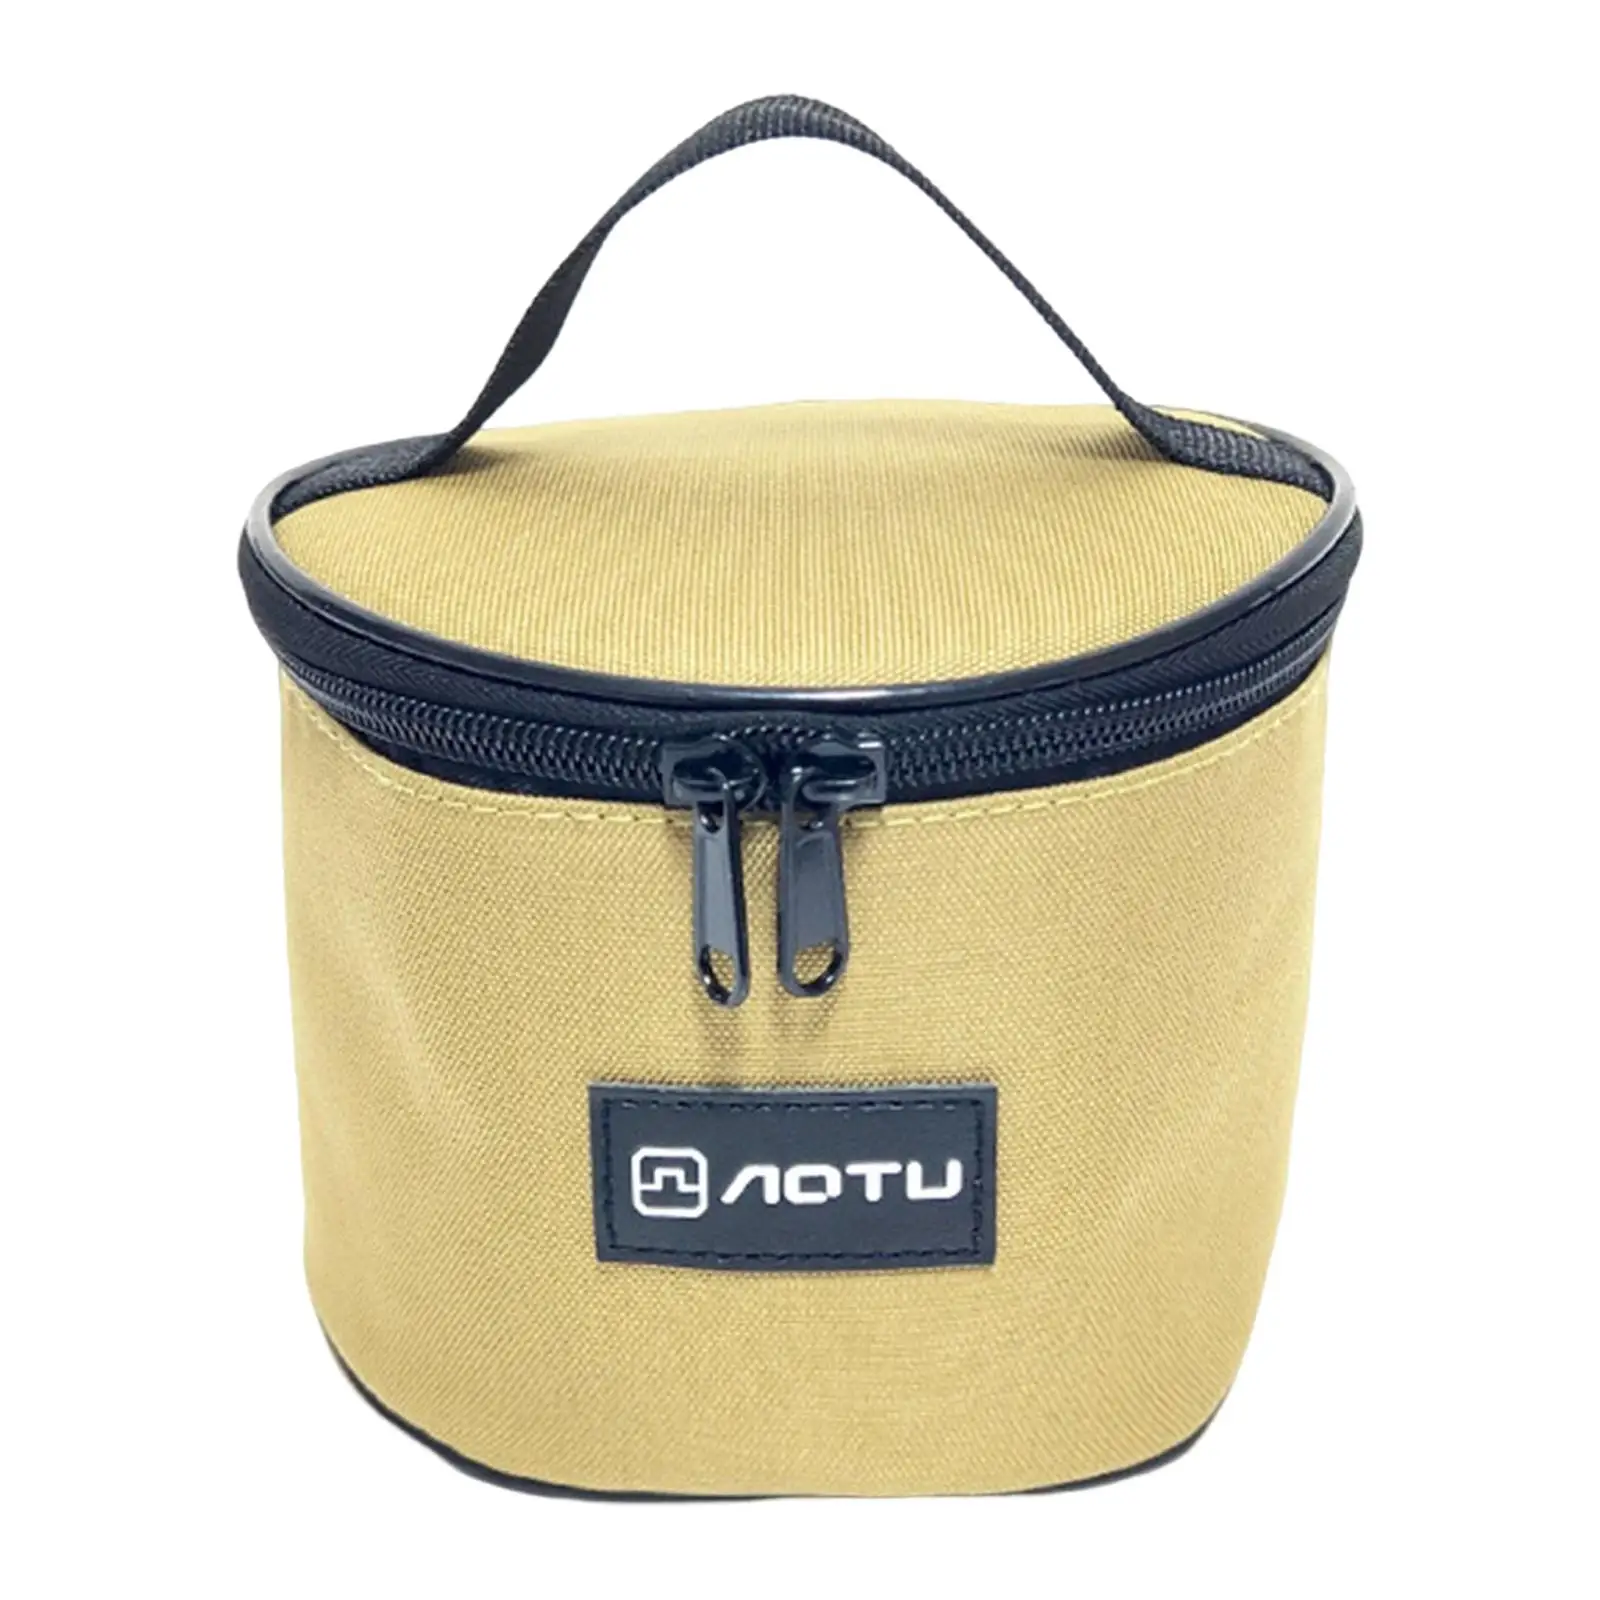 Oxford Bowl Storage Bag Organizer with Handle Accessories Hanging Tableware Hiking Camping Outdoor Pouch for Picnic Dinnerware